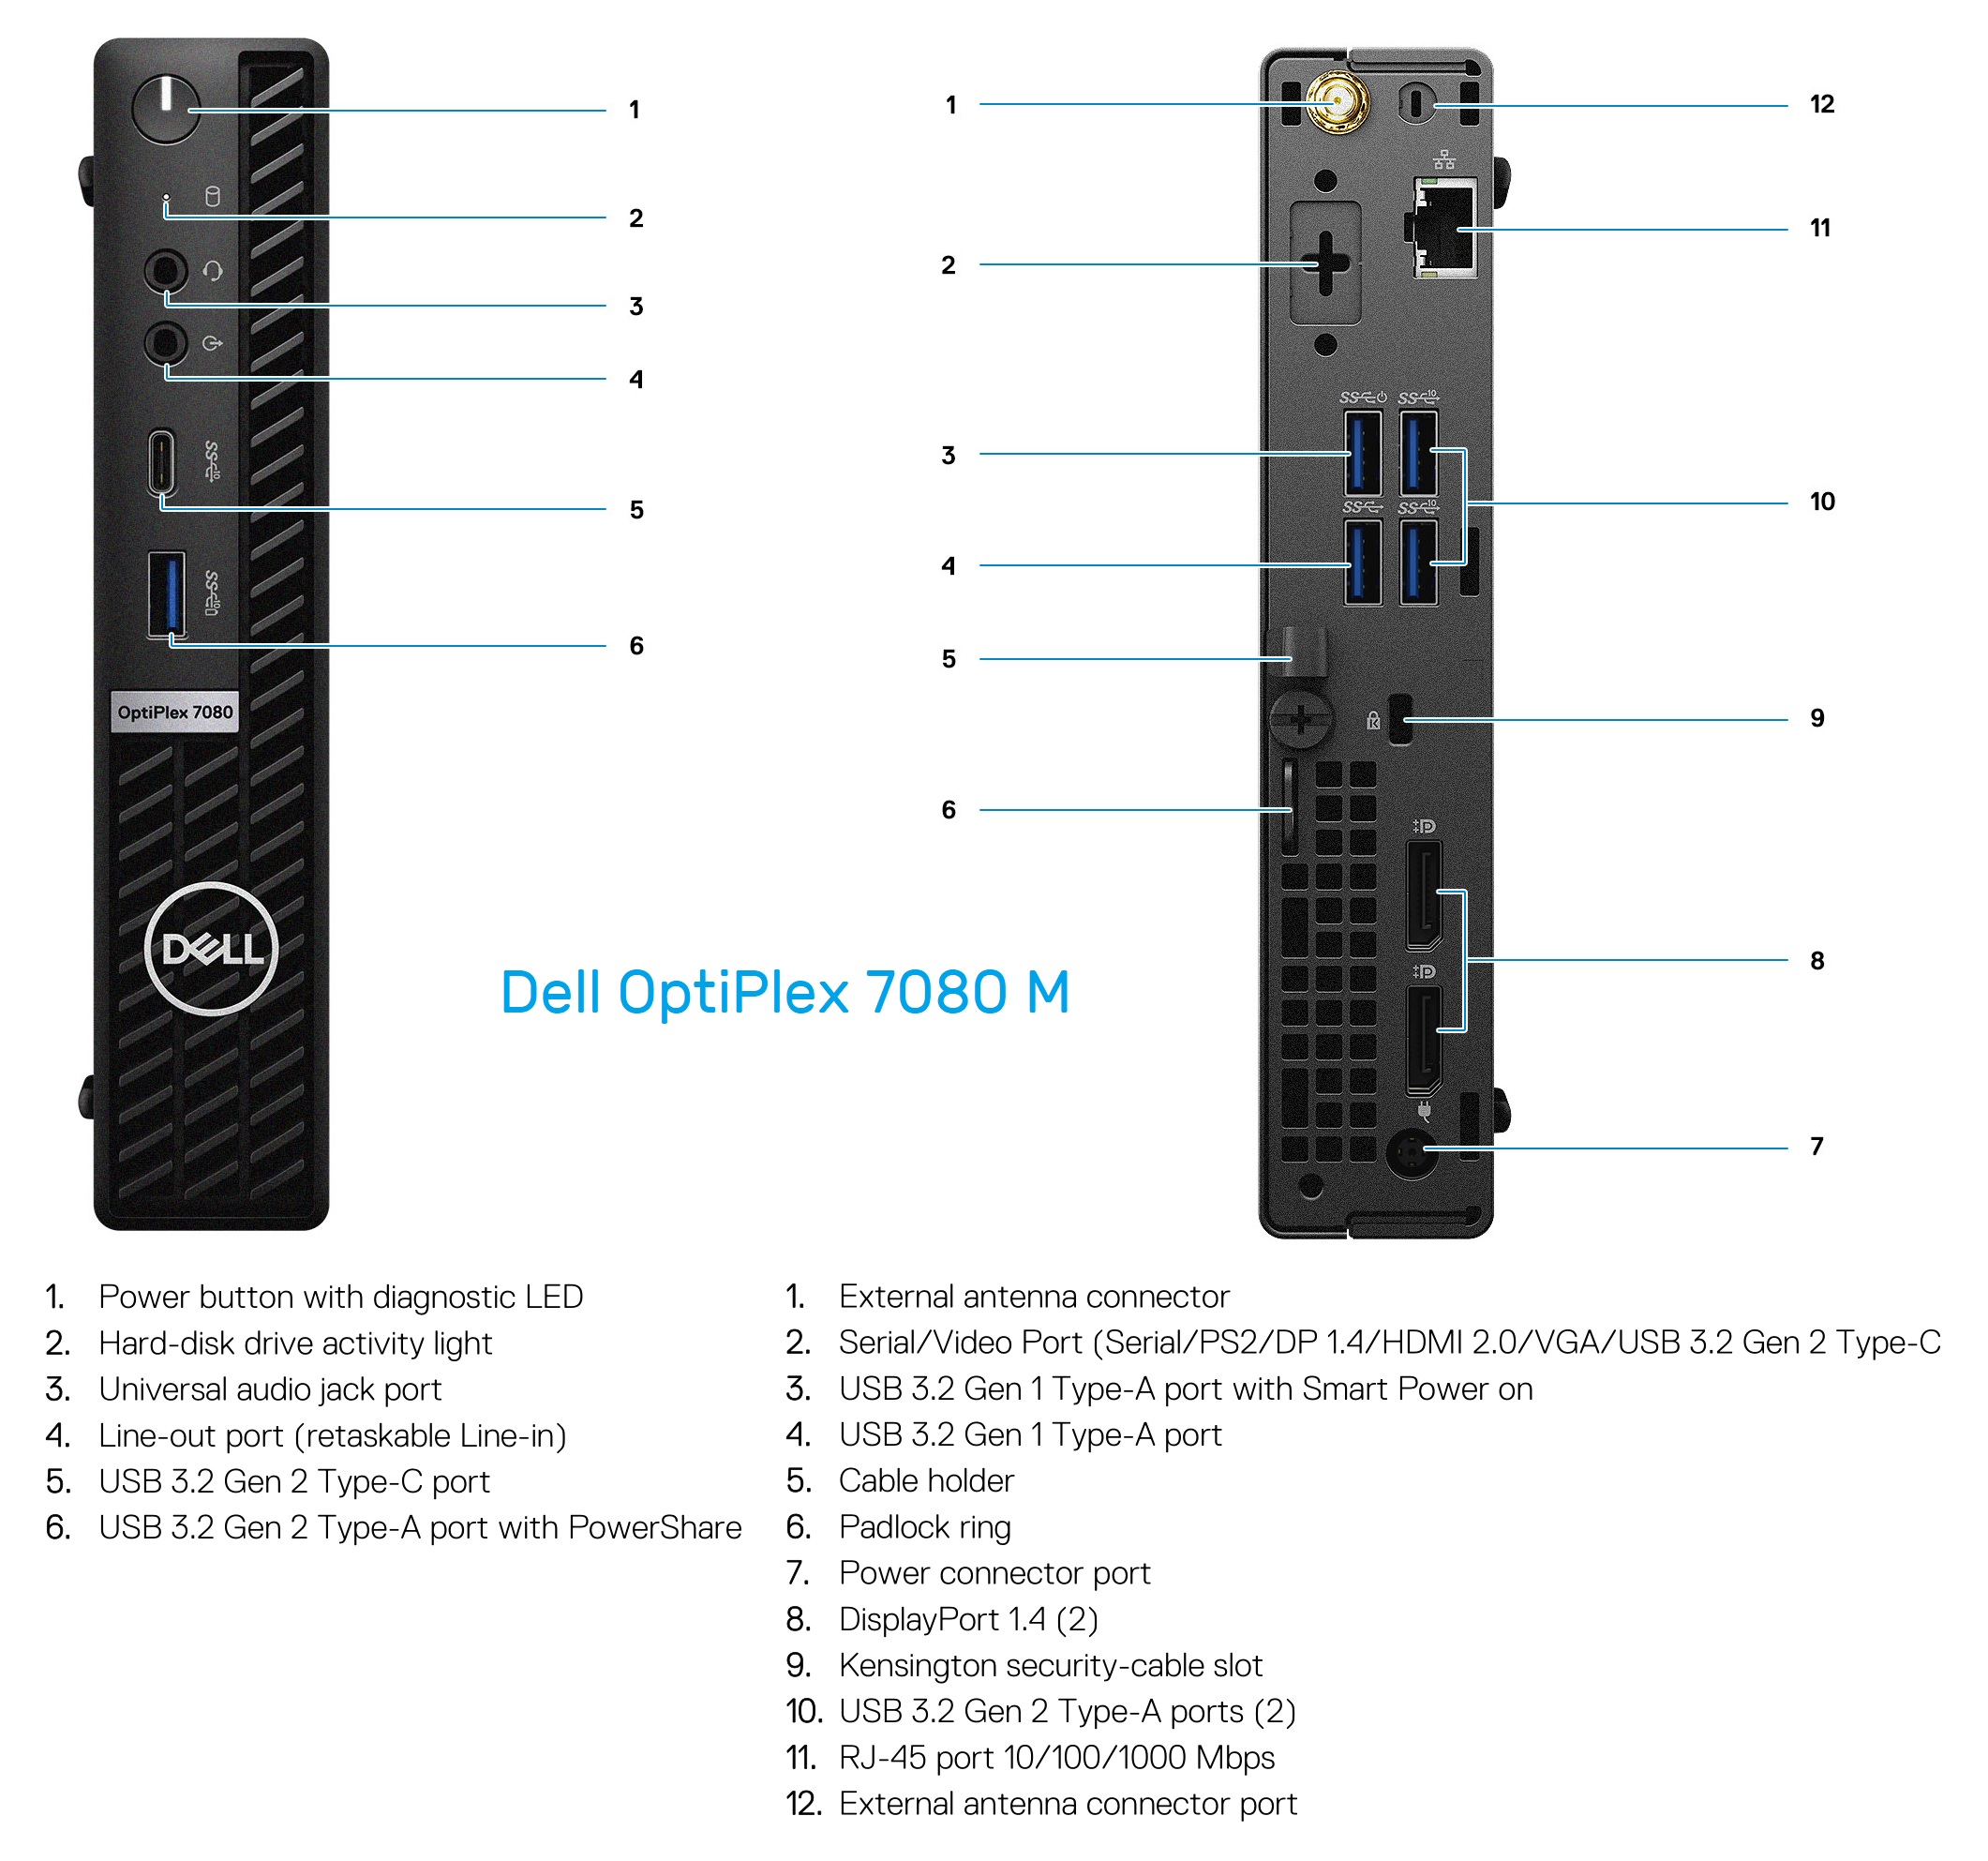 Dell OptiPlex 7080 Review and Guide